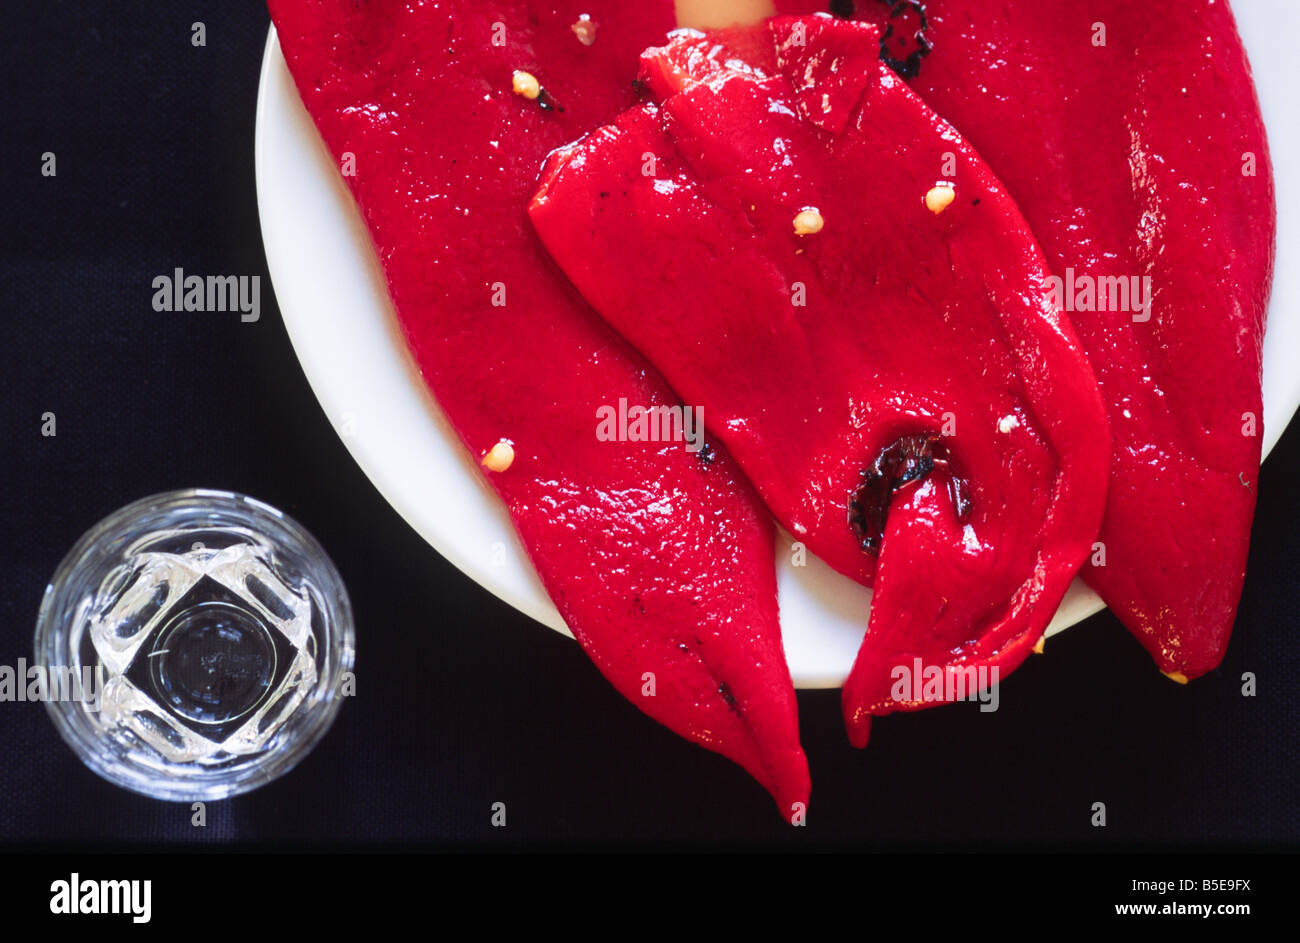 Red paprika as starter with a glas of ouzo (mezes tapa) Stock Photo